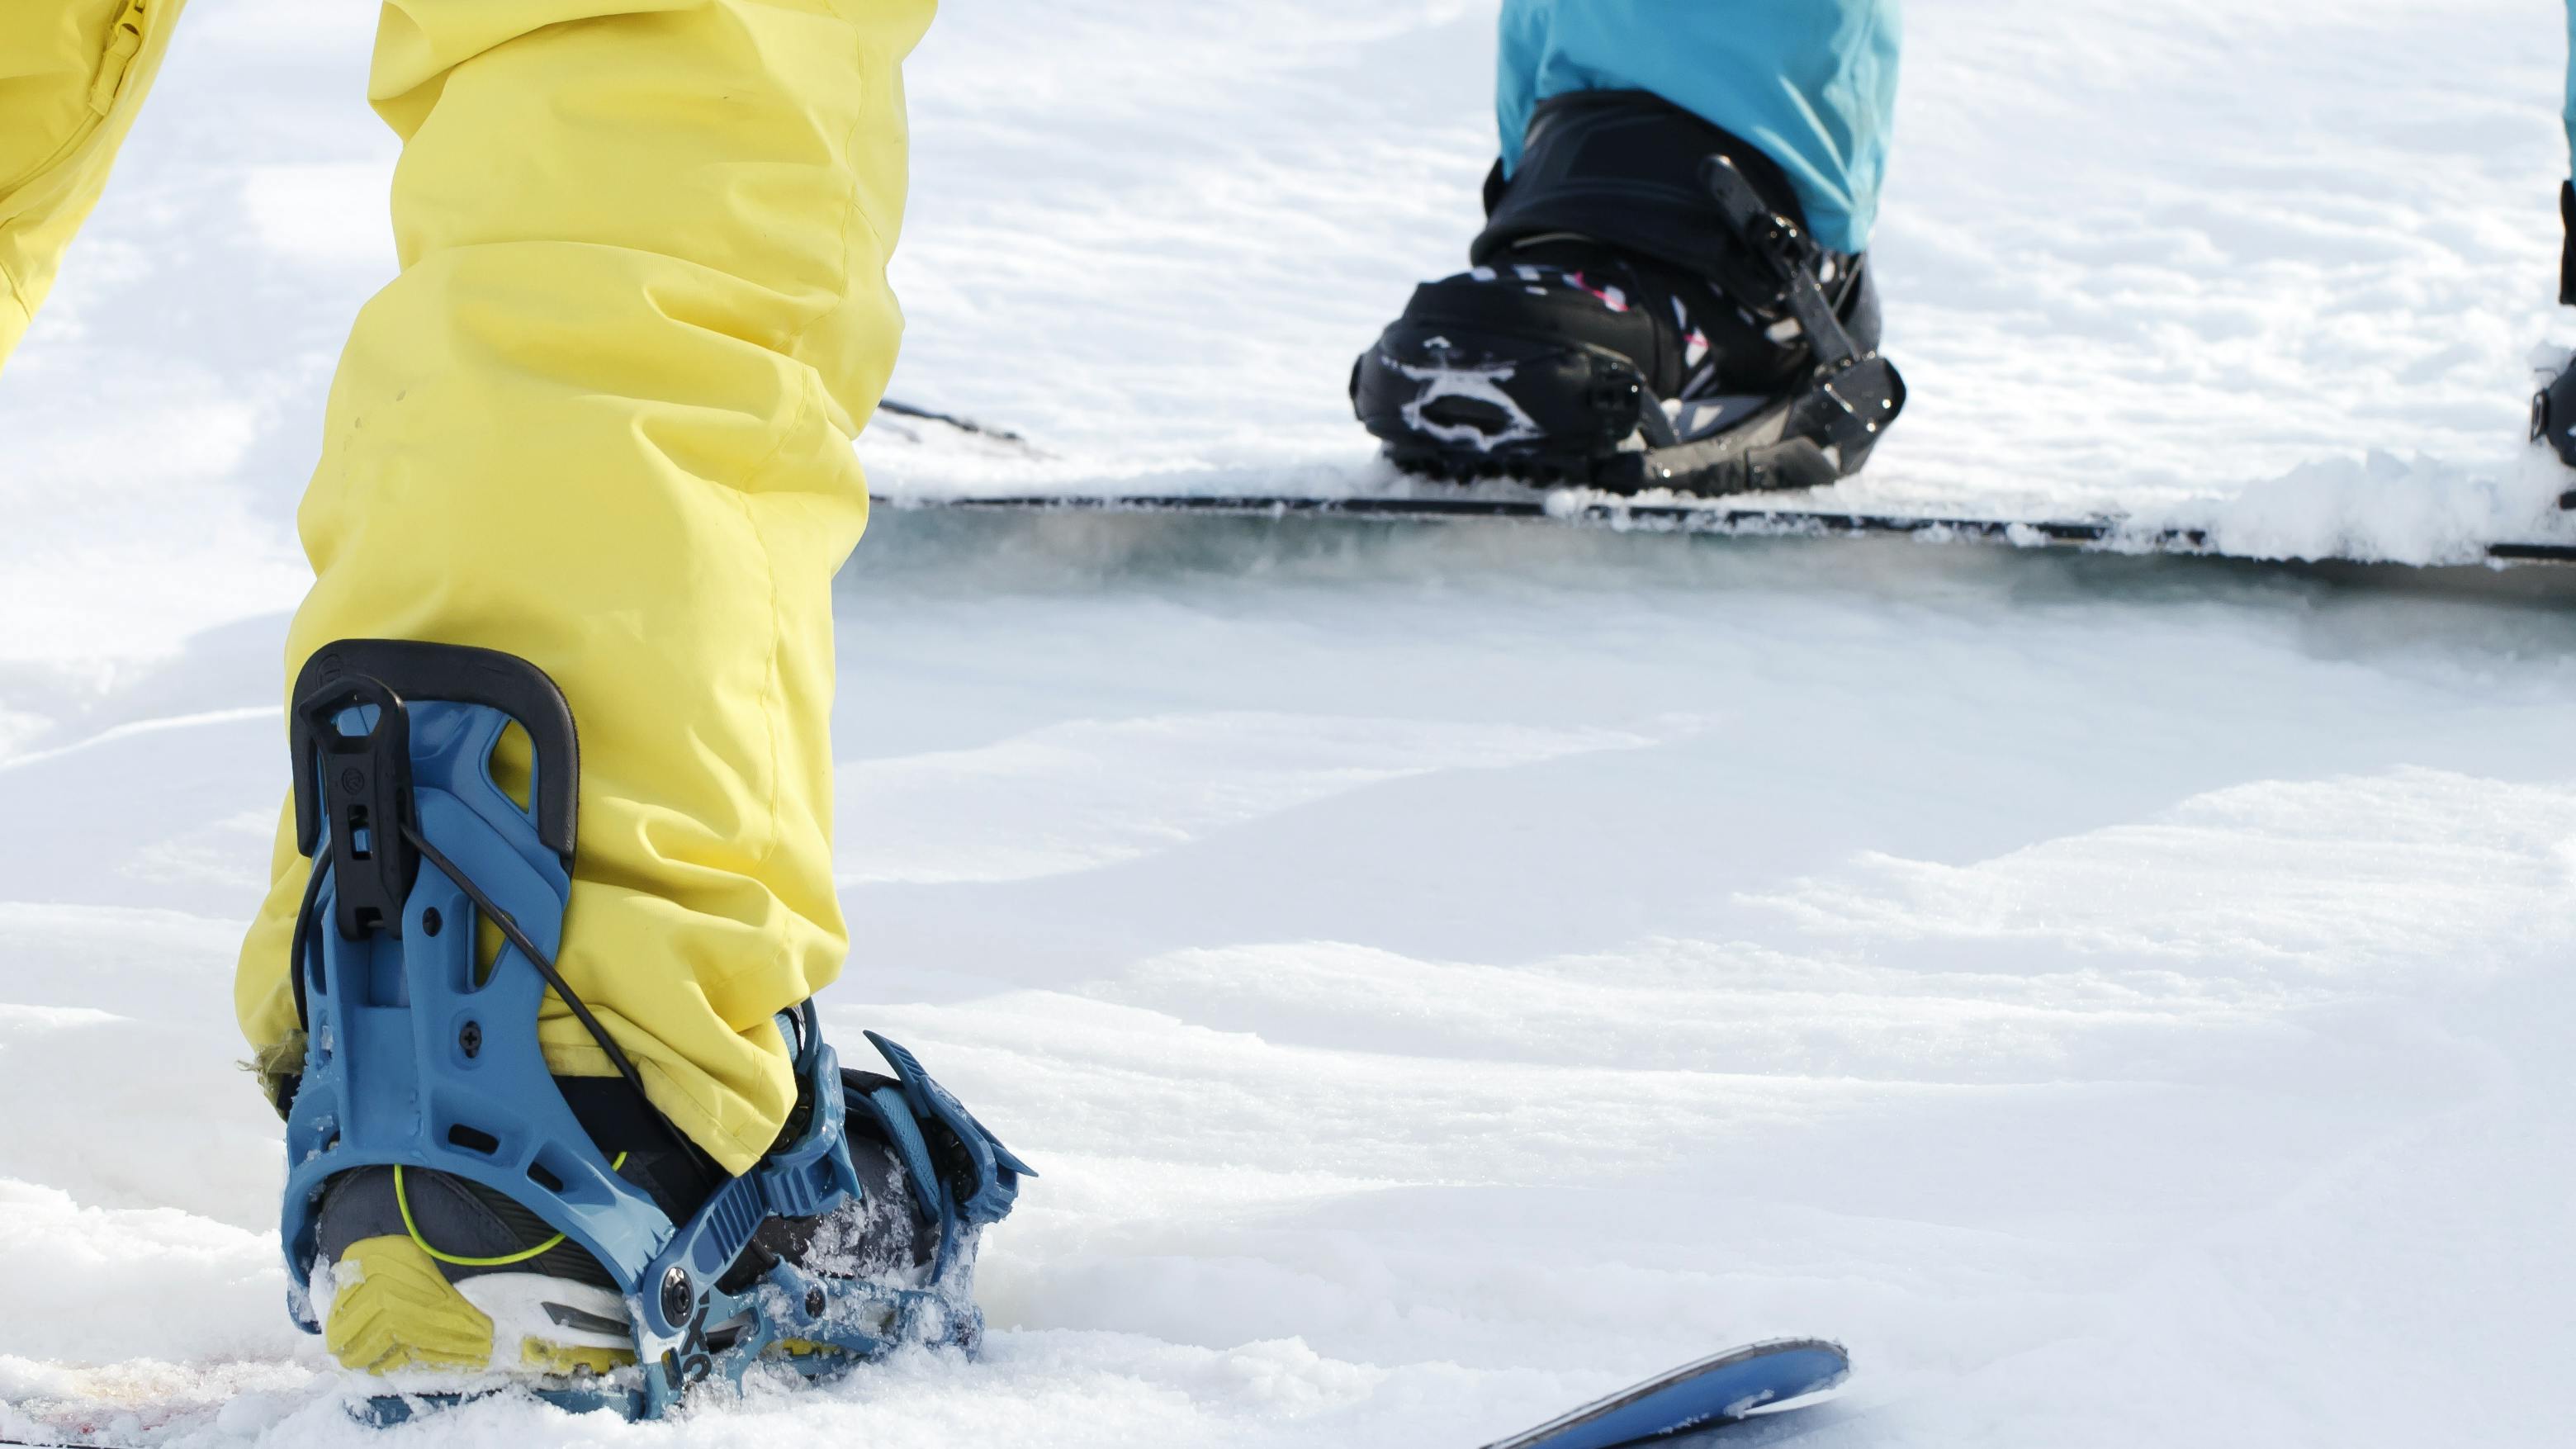 Two snowboarders stand in their snowboard boots and bindings in the snow. The image is cropped so just their boots, bindings, and boards are visible. 